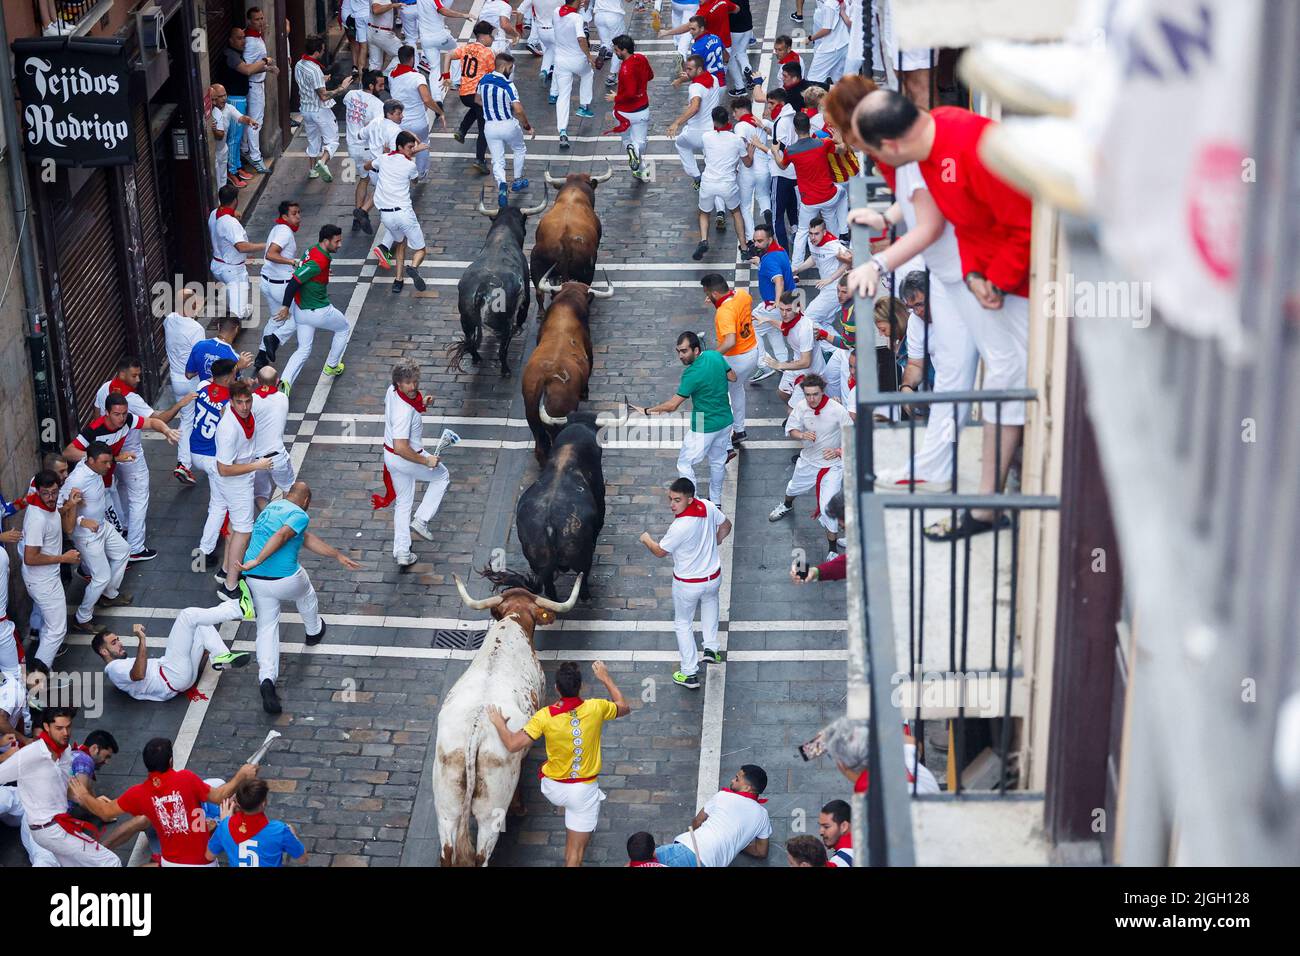 Revellers sprint during the running of the bulls at the San Fermin festival  in Pamplona, Spain, July 11, 2022. REUTERS/Juan Medina Stock Photo - Alamy